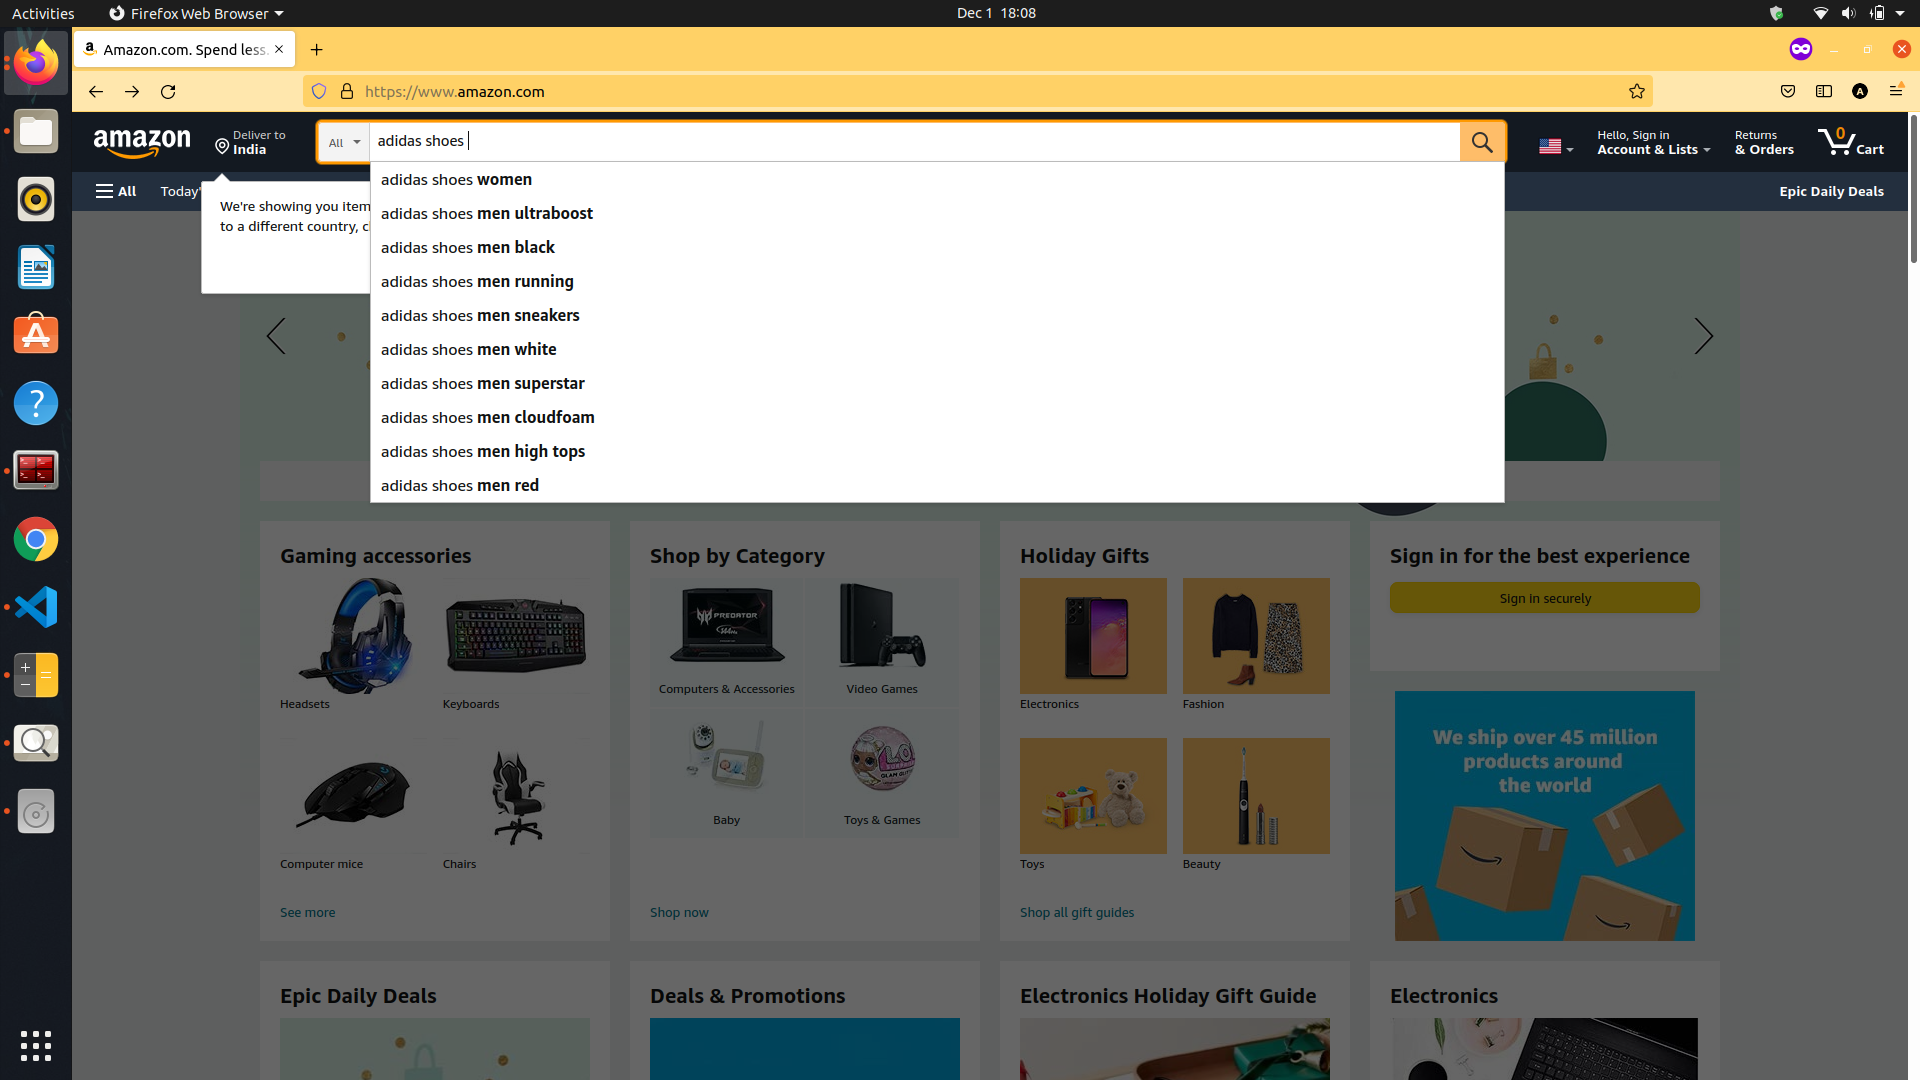 Screenshot: Search for a specific brand on Amazon's search